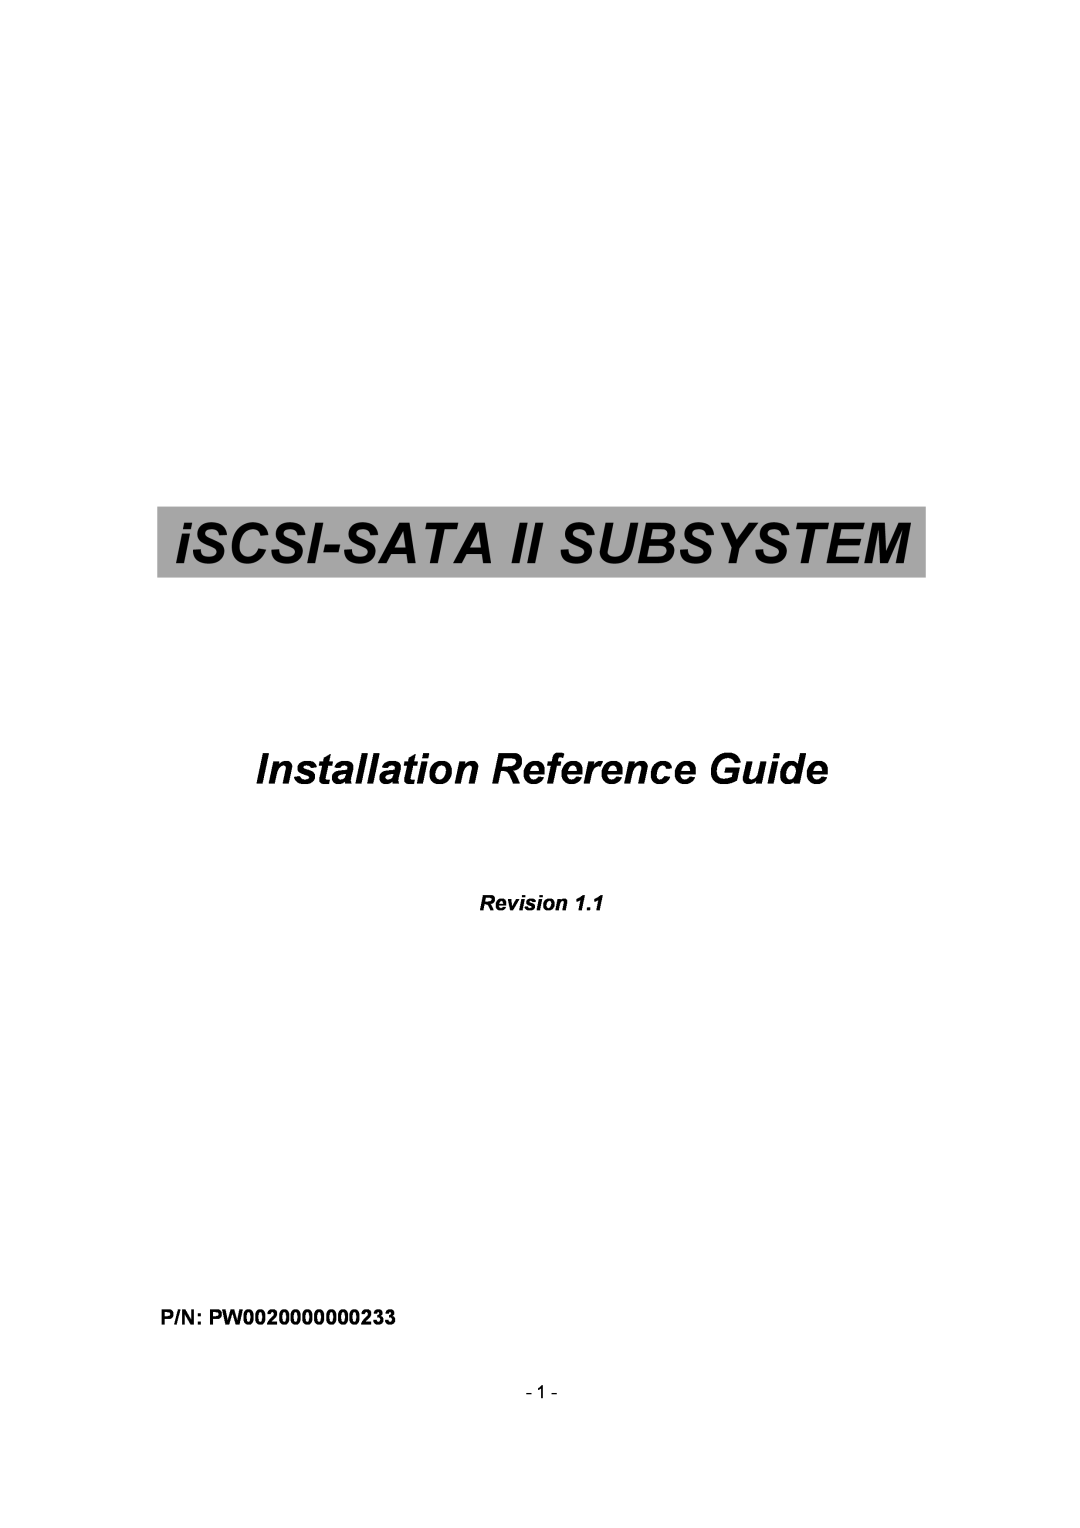 APC manual iSCSI-SATA II SUBSYSTEM, Installation Reference Guide, Revision, P/N PW0020000000233 